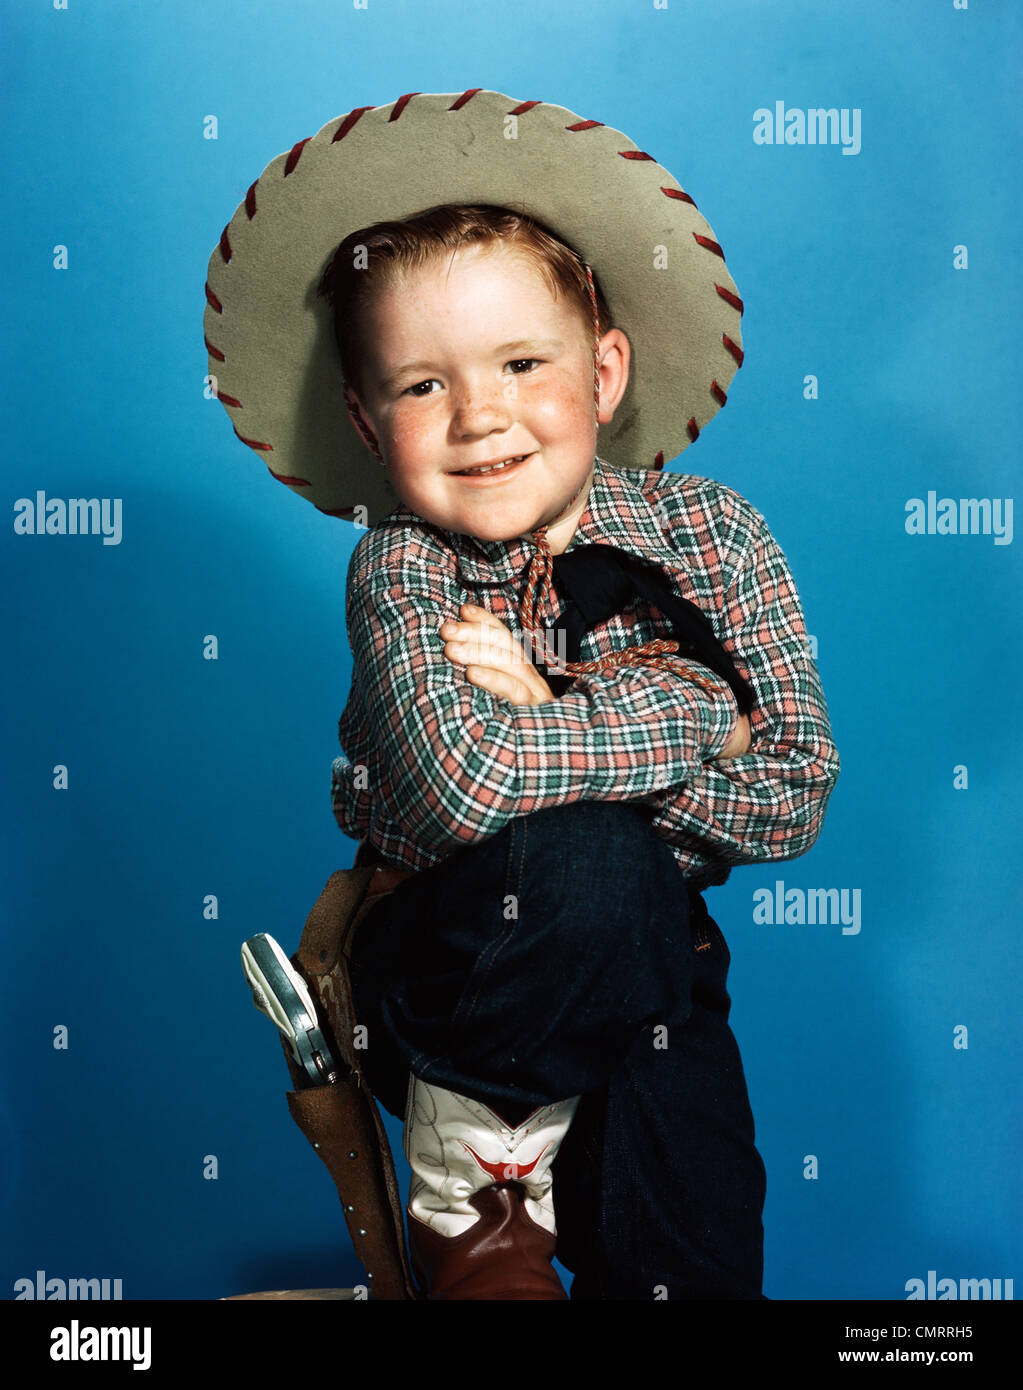 1940s PORTRAIT SMILING BOY WEARING COWBOY HAT LEATHER BOOTS HOLSTER TOY GUN  Stock Photo - Alamy